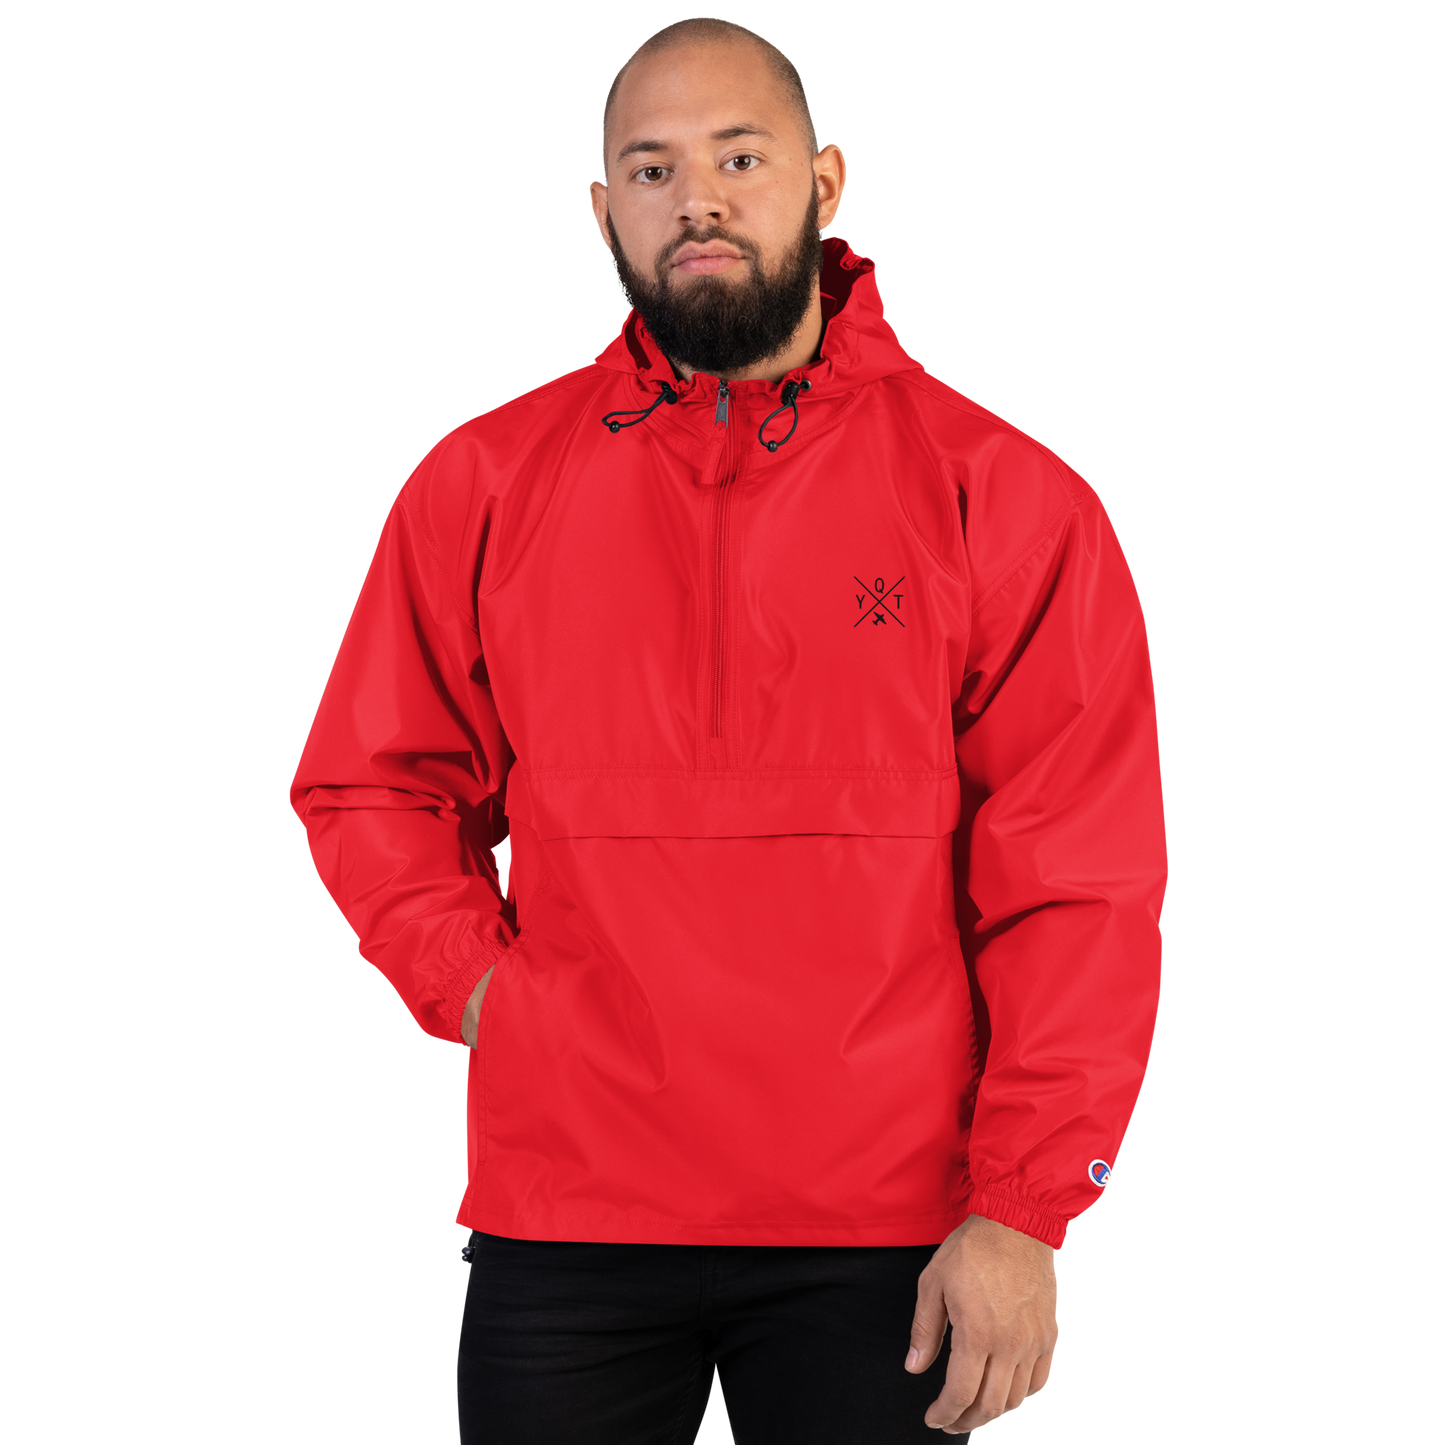 Crossed-X Packable Jacket • YQT Thunder Bay • YHM Designs - Image 11